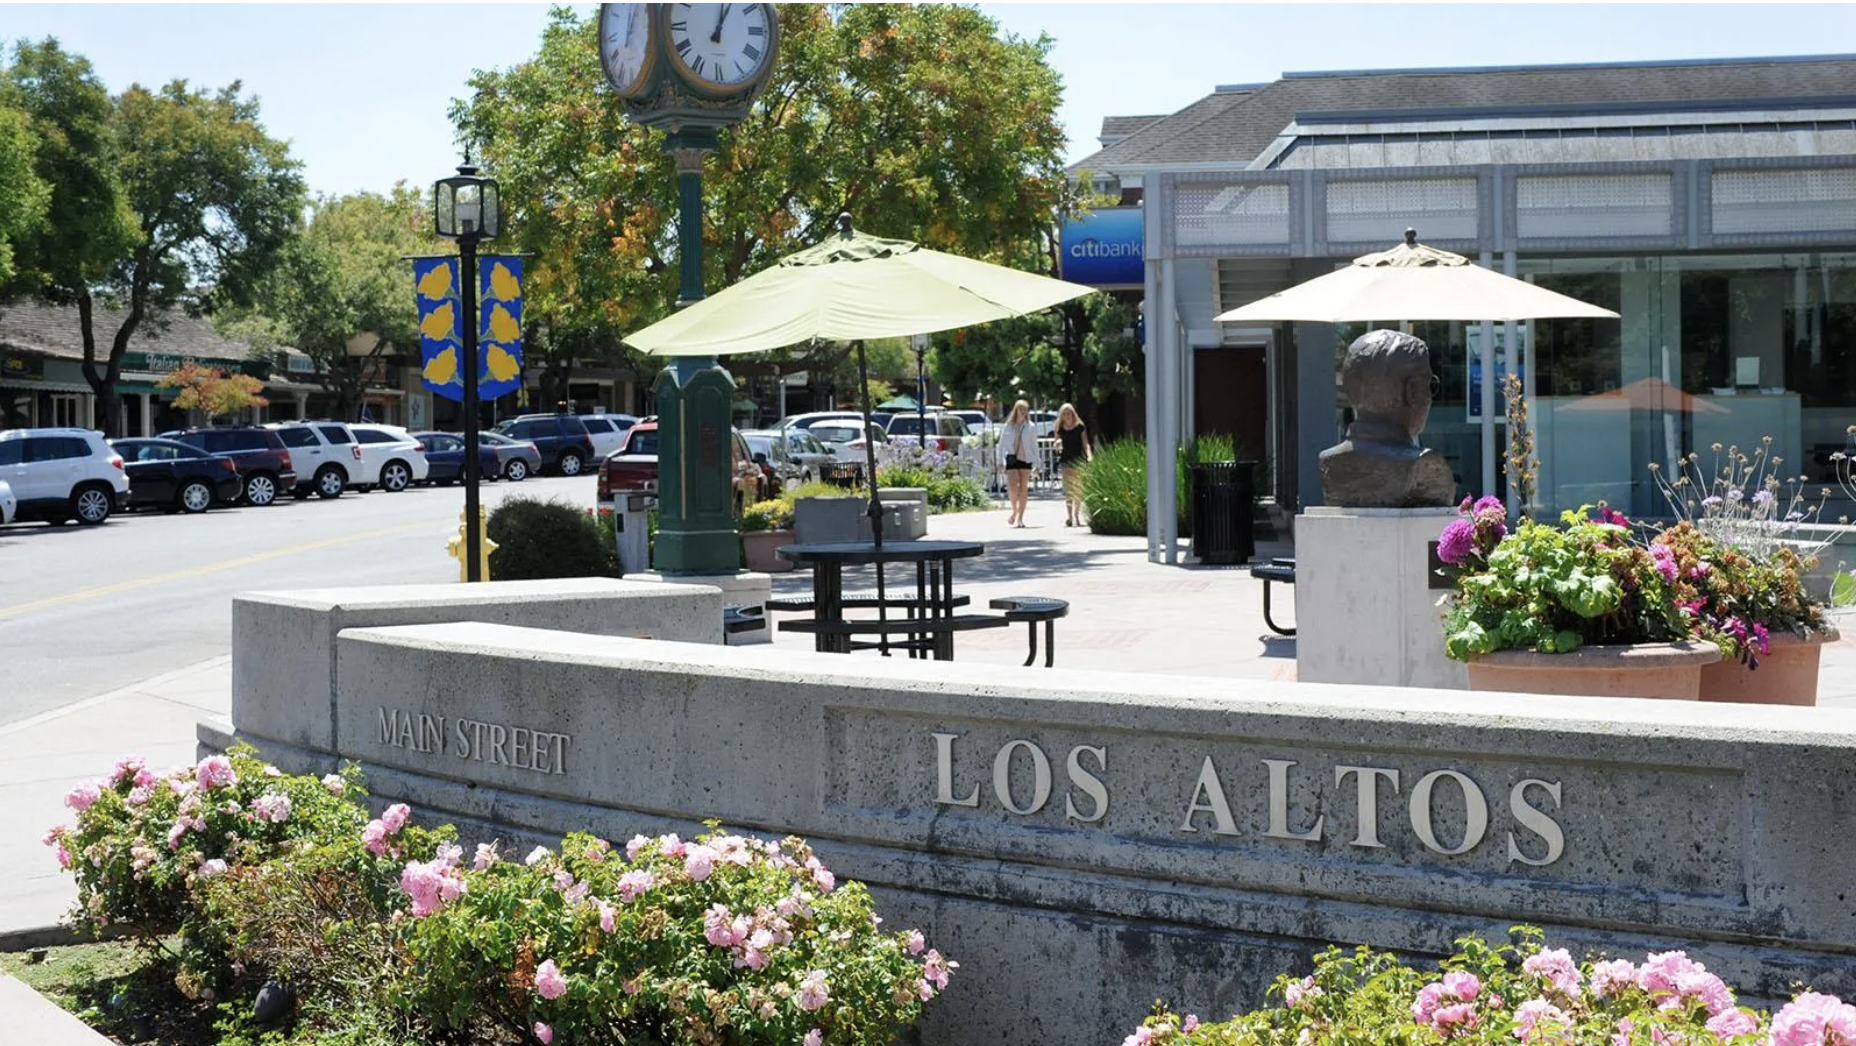 Hotel is on Main street in Downtown Los Altos